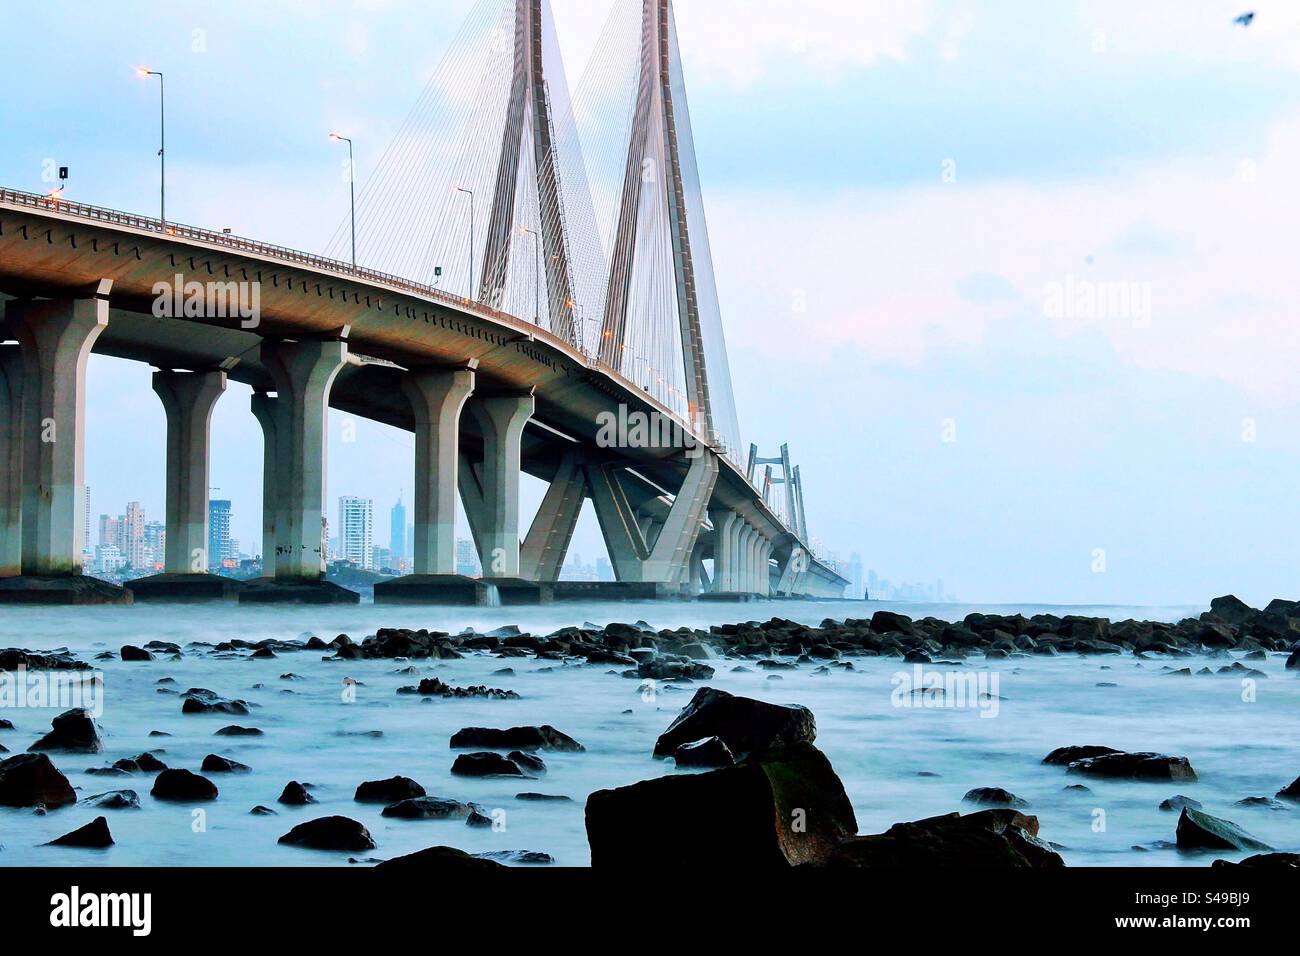 Bridging dreams across the Arabian waves, Bandra Worli Sea Link stands tall. Mumbai's lifeline in steel and concrete, connecting hearts and horizons. Stock Photo